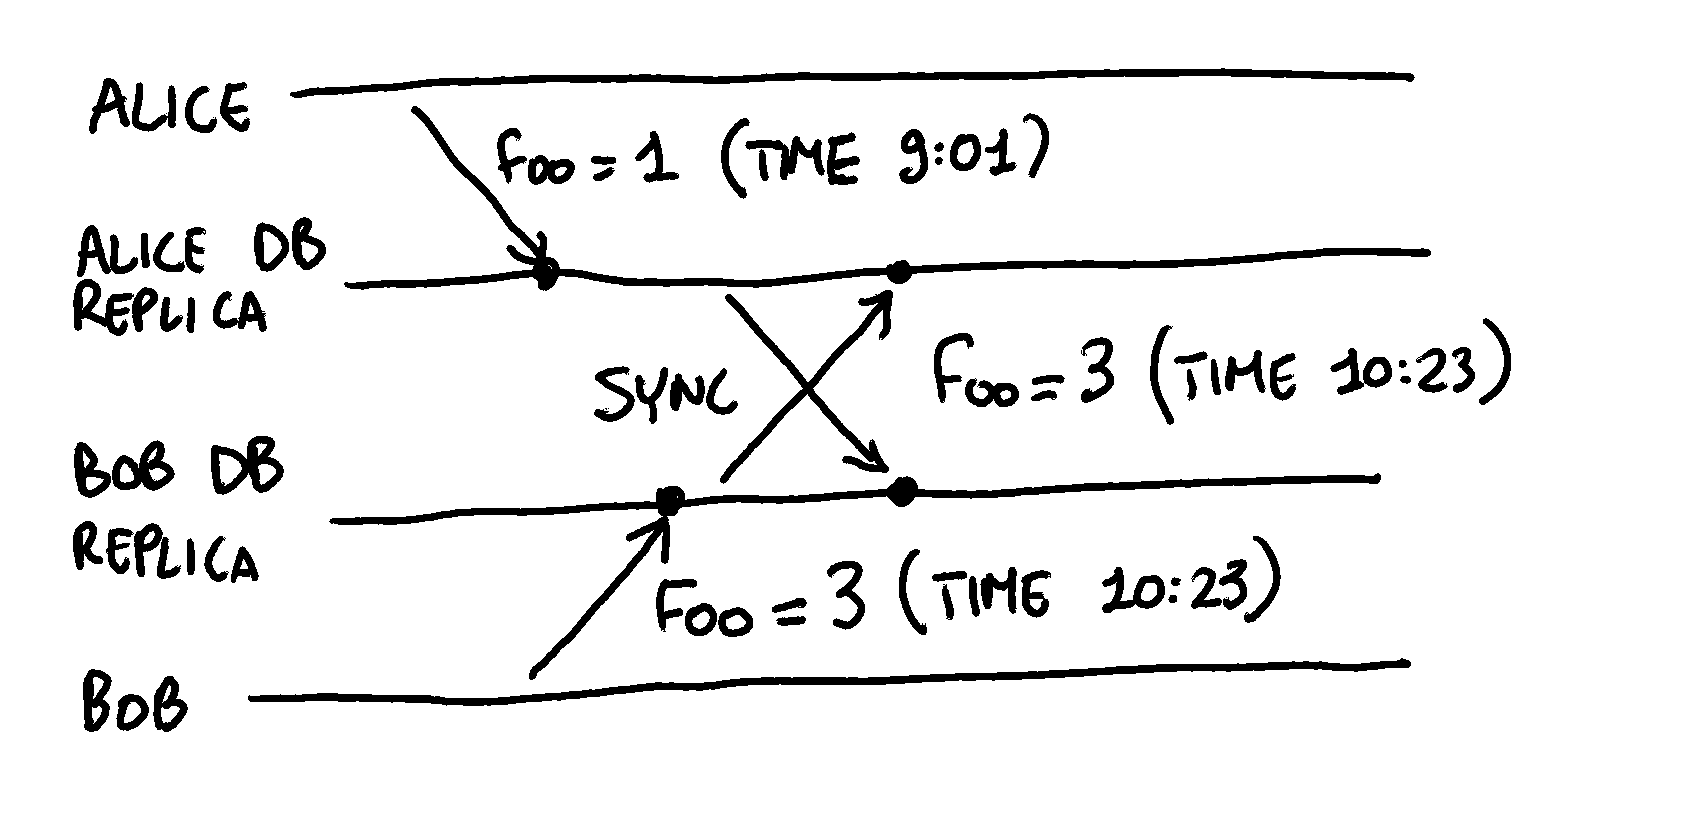 Concurrent write in a multi-master scenario, with timestamps attached.